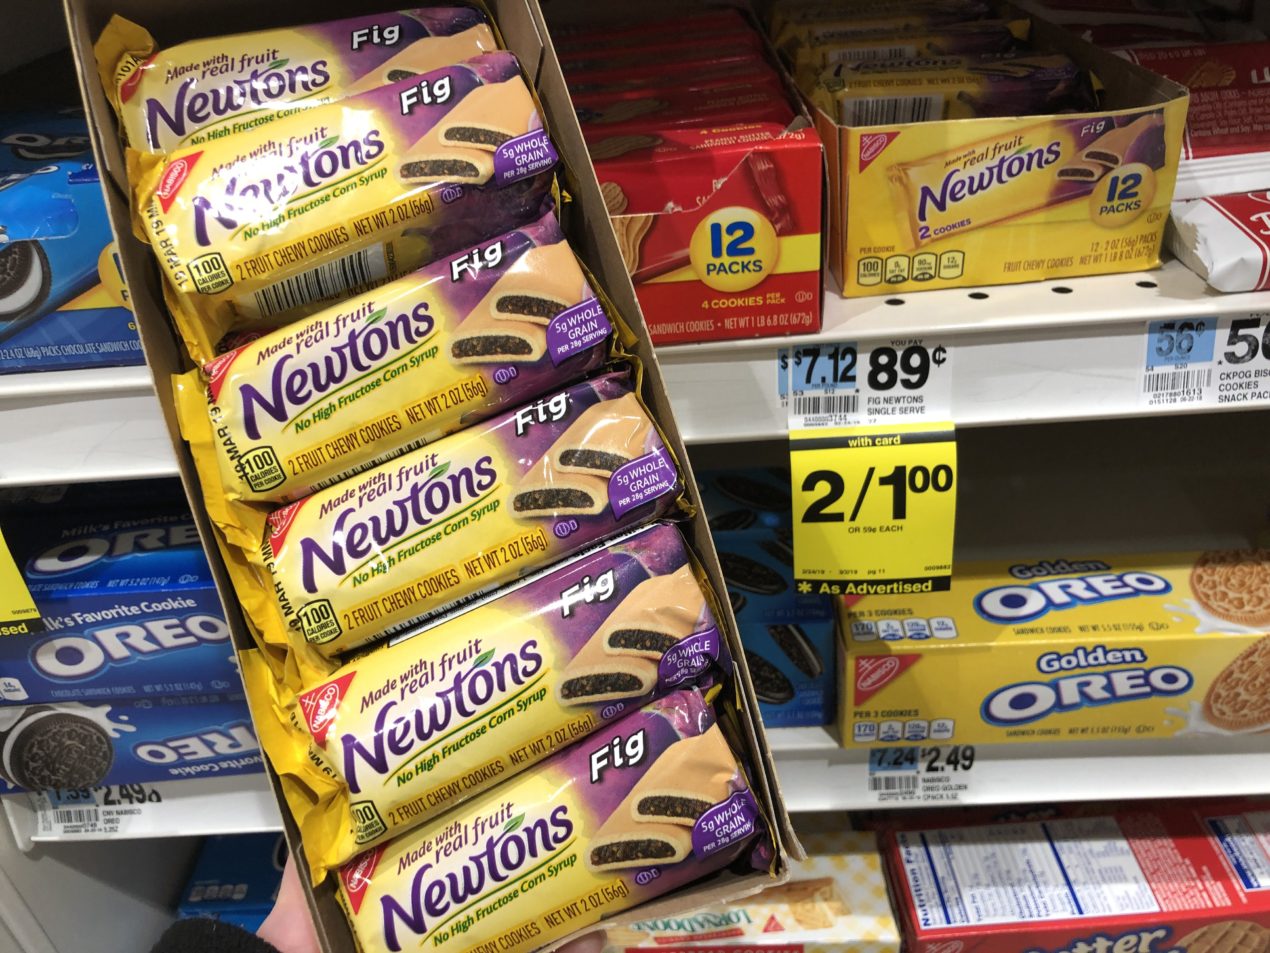 fig newtons 2 for $1.00 at rite aid